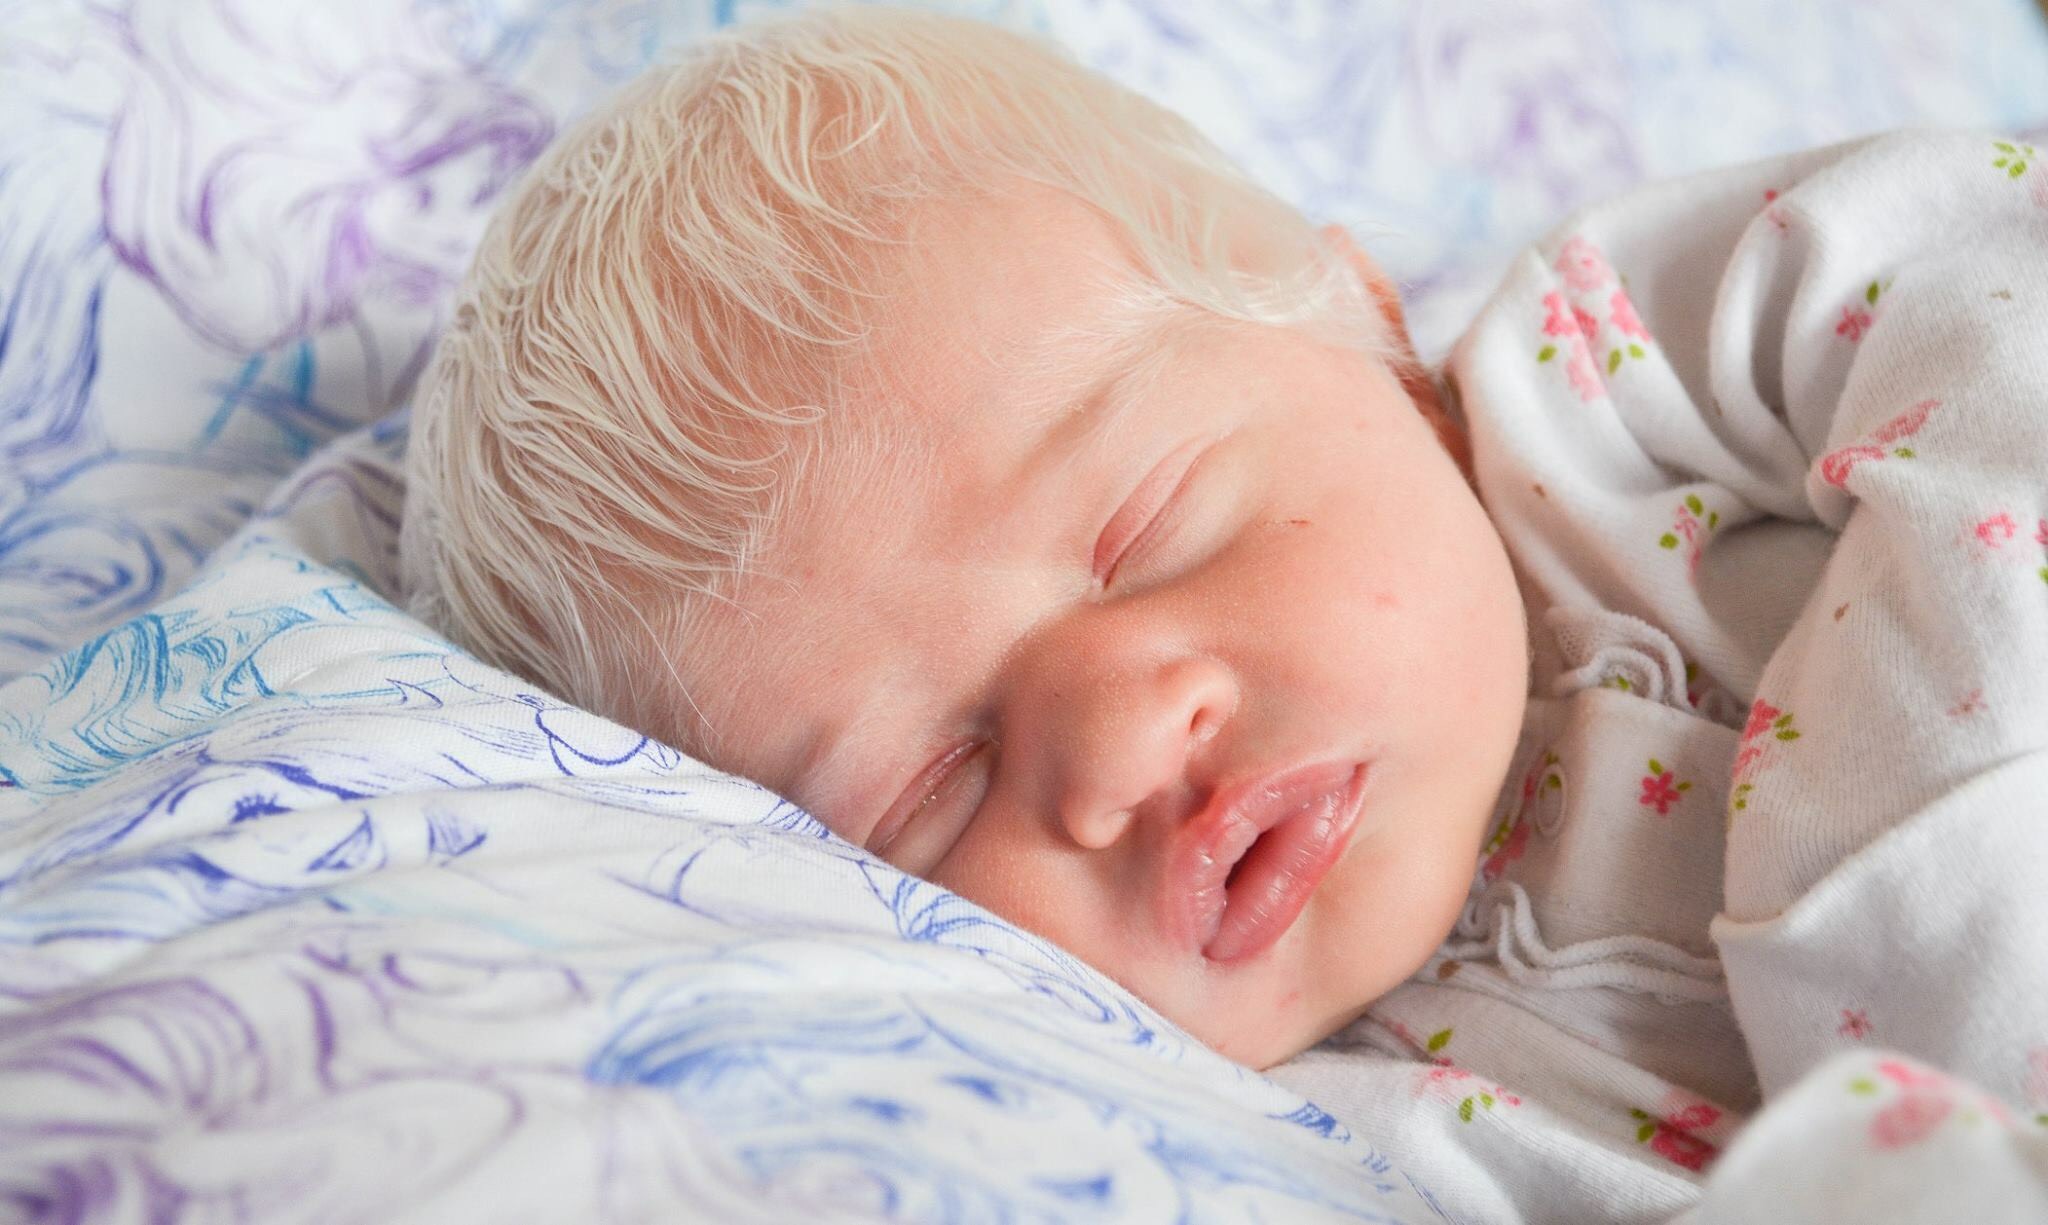 White Hair On Baby This Baby Was Born With The Same White Hair Streak As Her Mom Allure Nppa